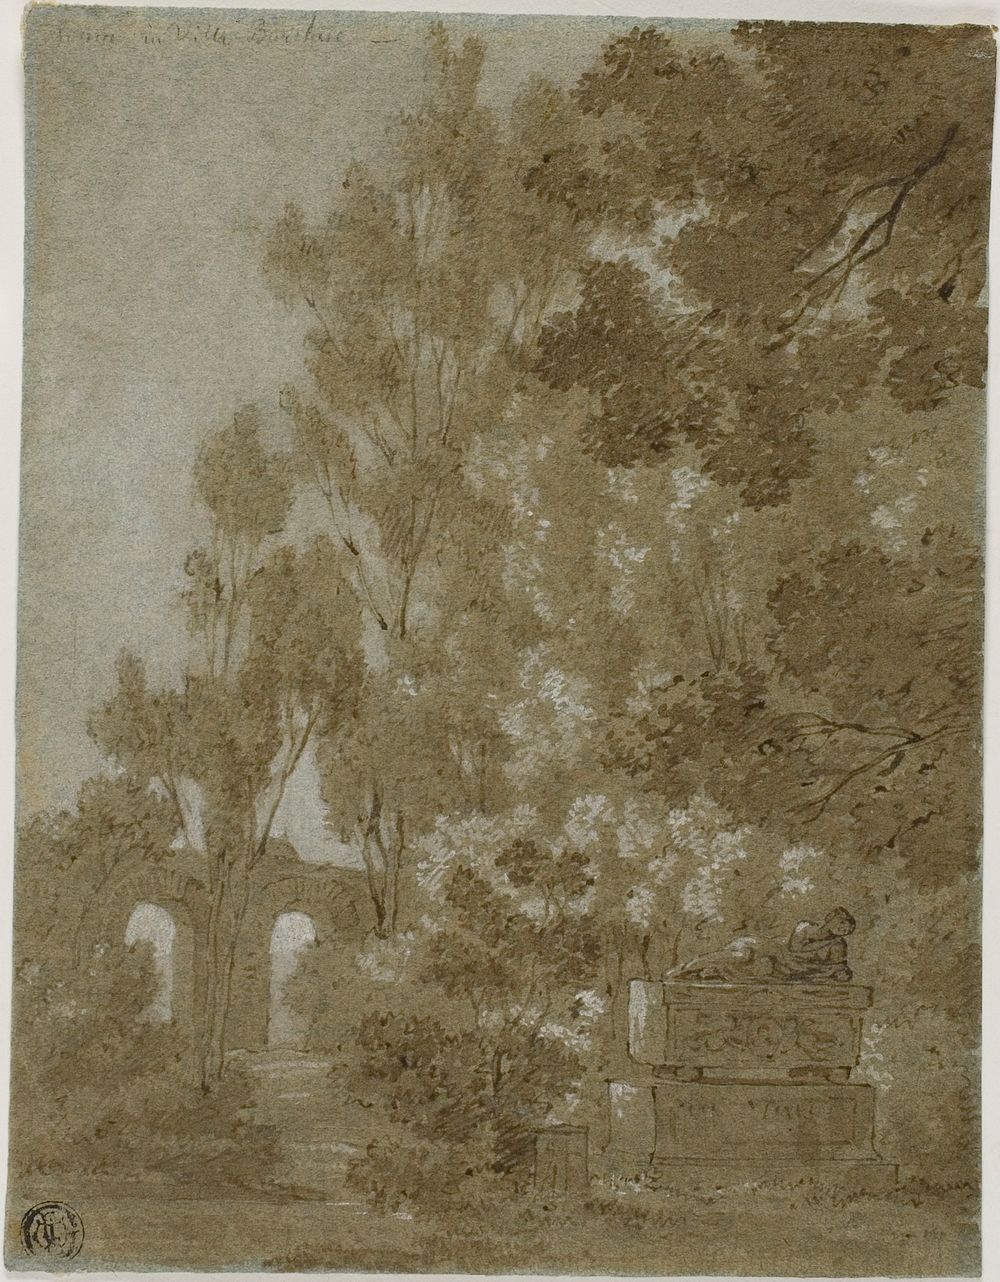 View of Ruined Arches and Tomb in Villa Borghese by Gaspard Dughet